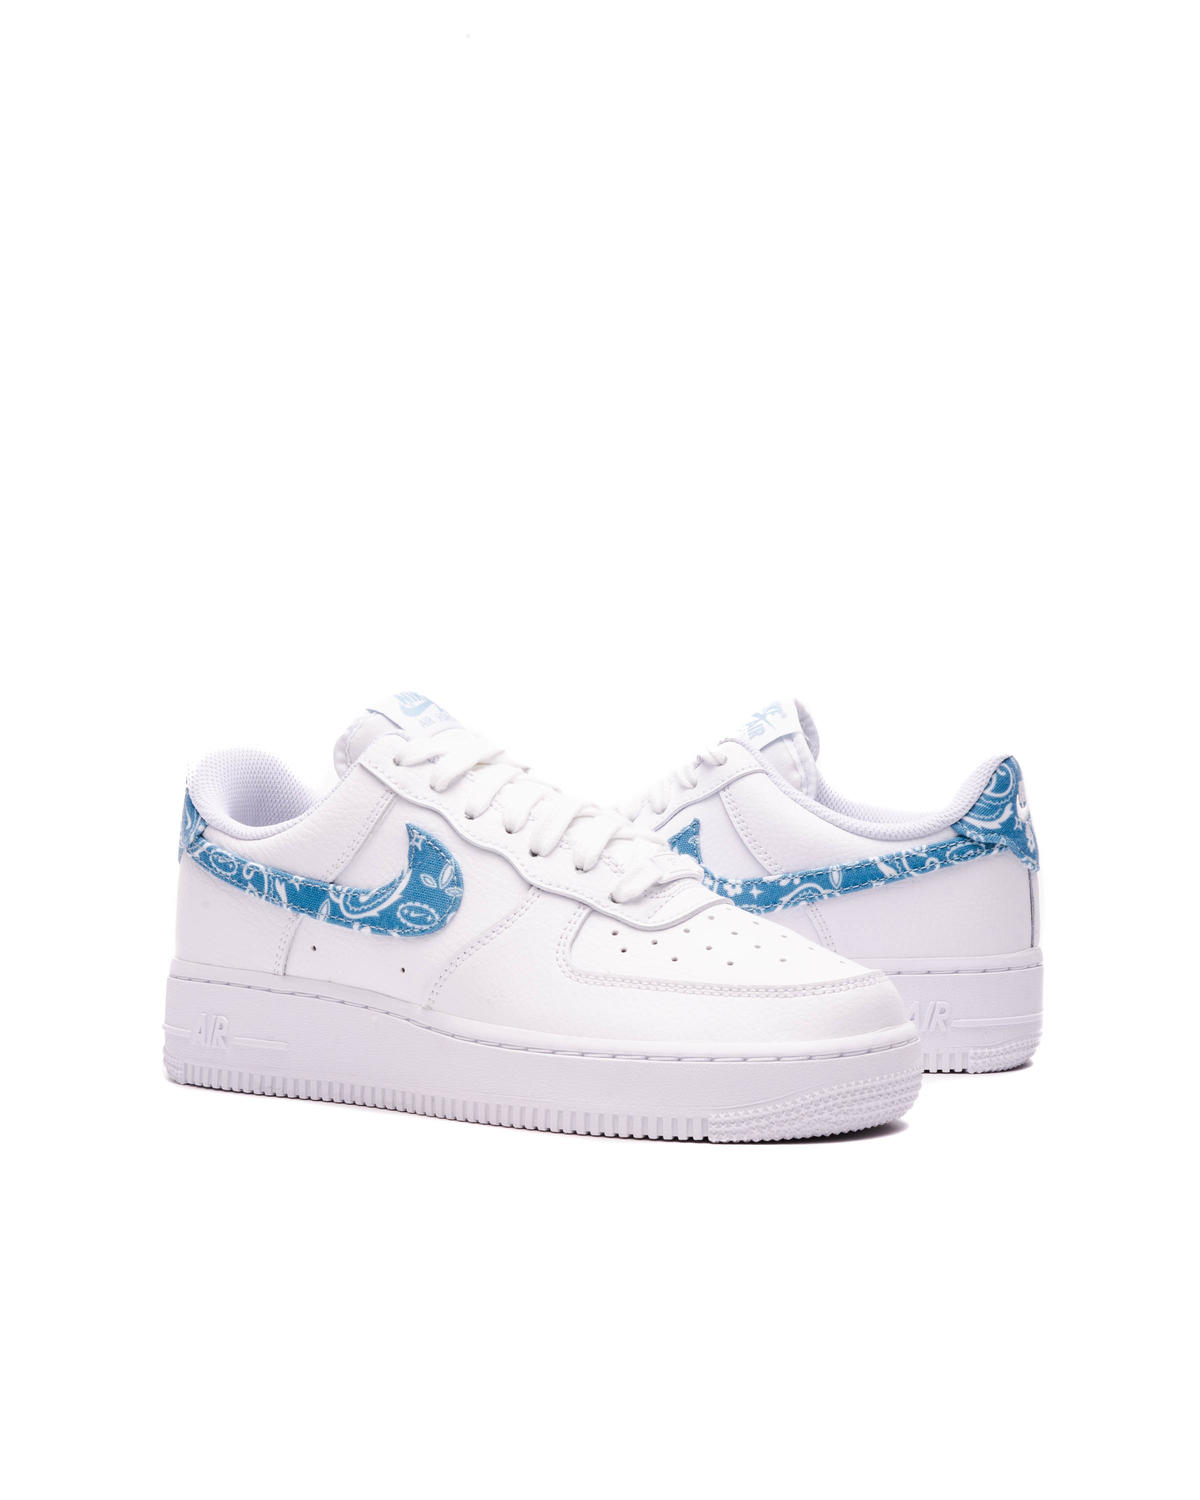 Nike WMNS AIR FORCE 1 '07 ESS | DH4406-100 | AFEW STORE